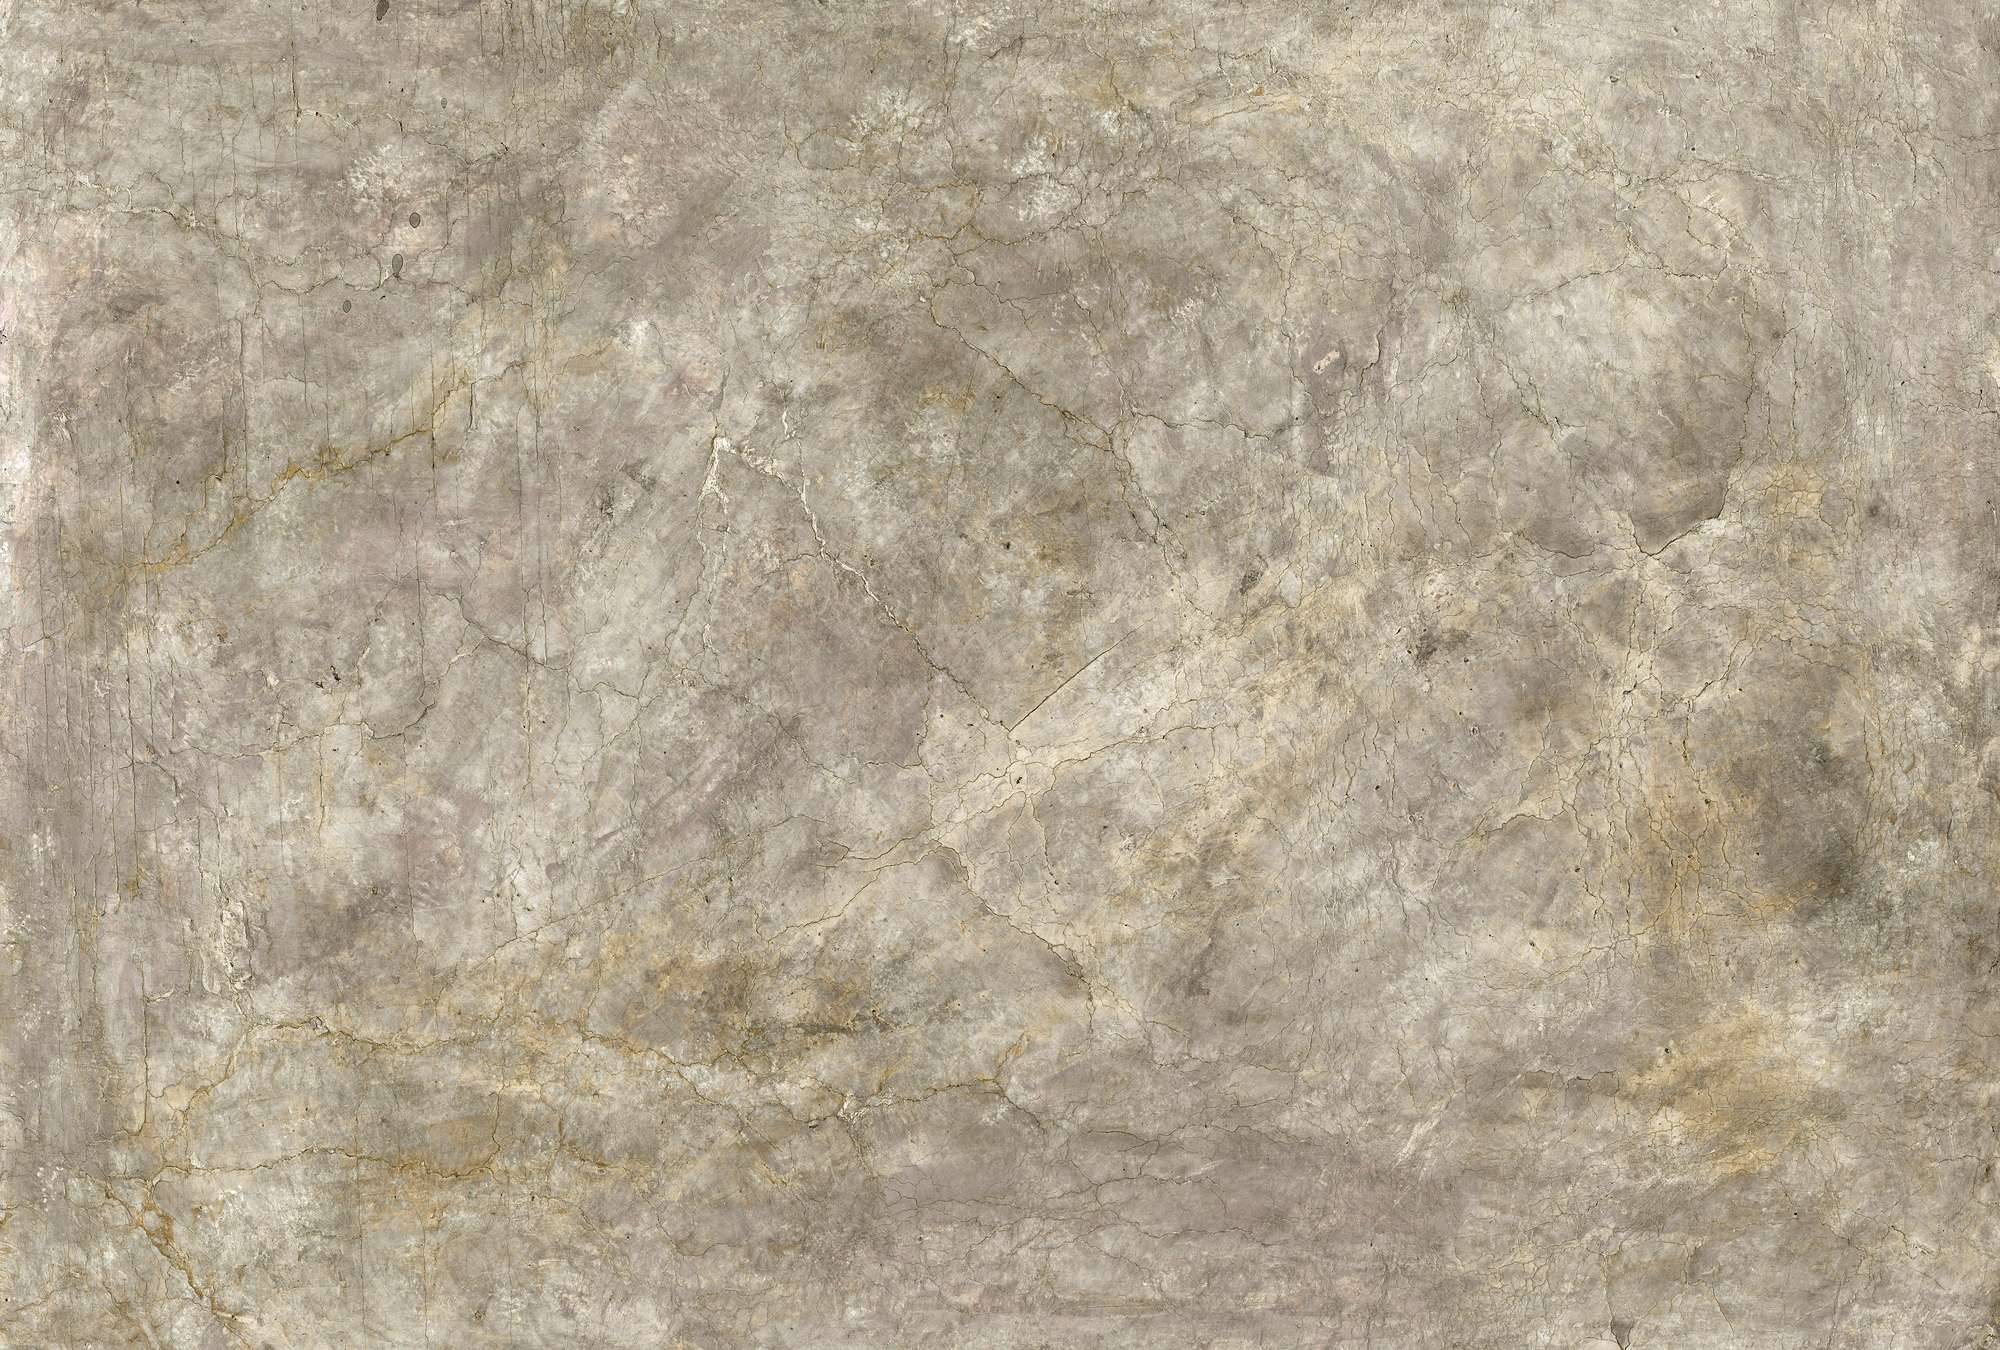             Nature stone photo wallpaper with texture pattern & marbling
        